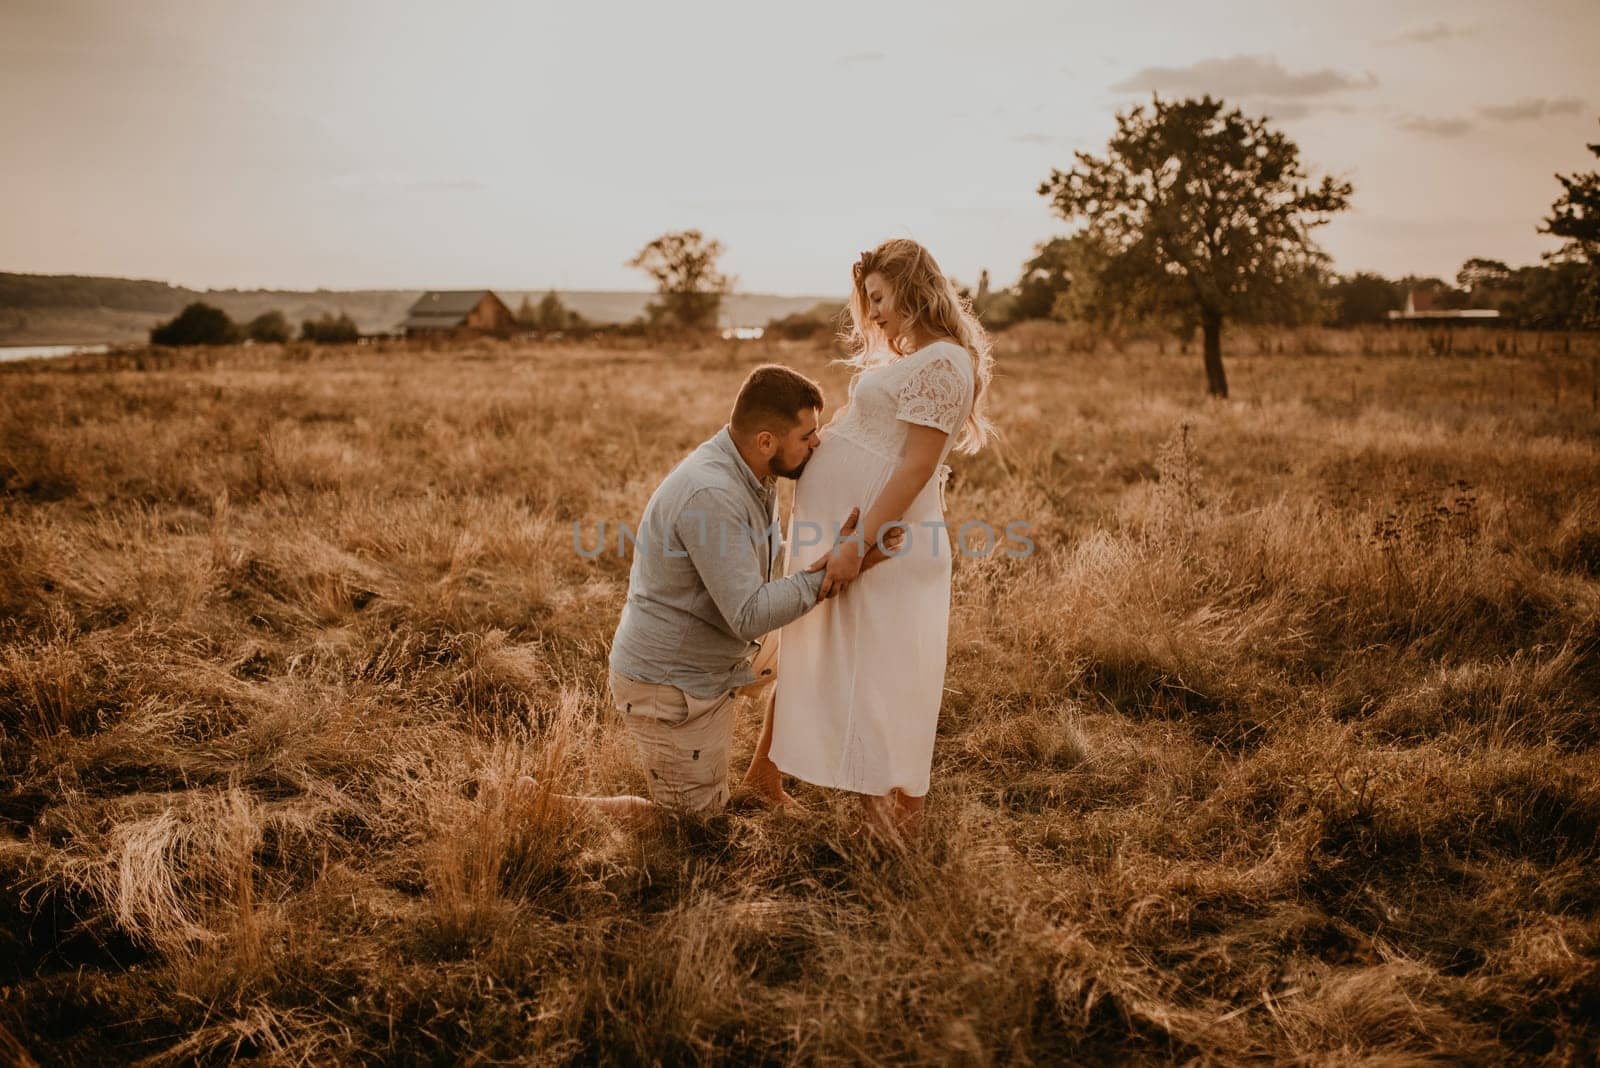 husband hugs pregnant wife hold hands on big round tummy kissing belly. Happy family resting in nature hugs kisses in summer at sunset. future mother Caucasian woman in white cotton dress. father